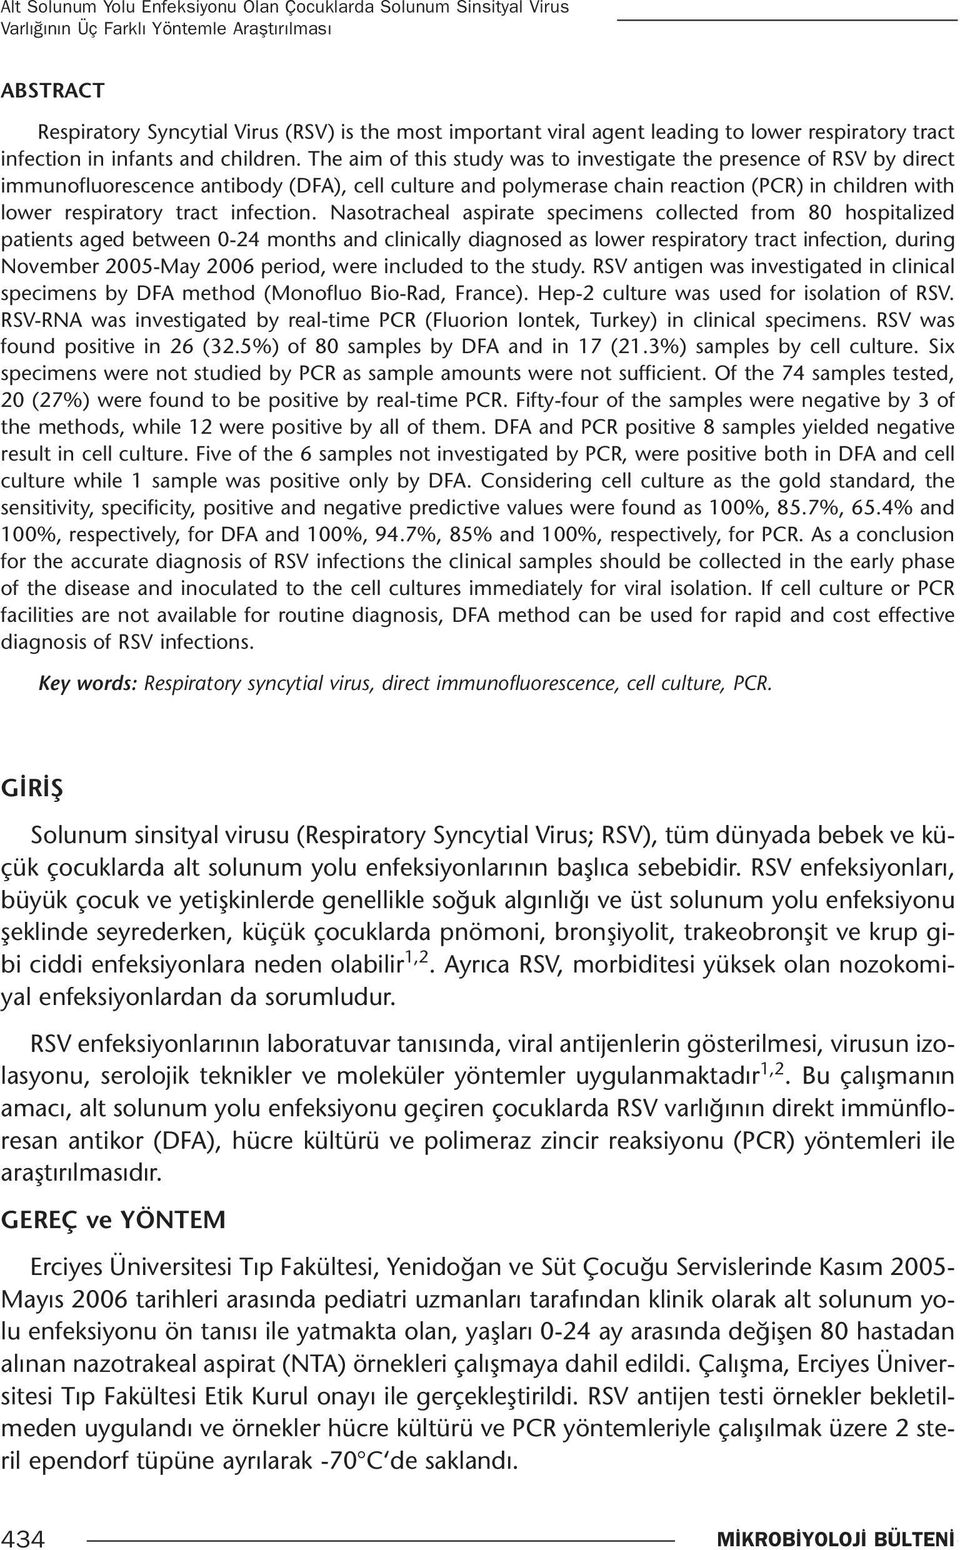 The aim of this study was to investigate the presence of RSV by direct immunofluorescence antibody (DFA), cell culture and polymerase chain reaction (PCR) in children with lower respiratory tract